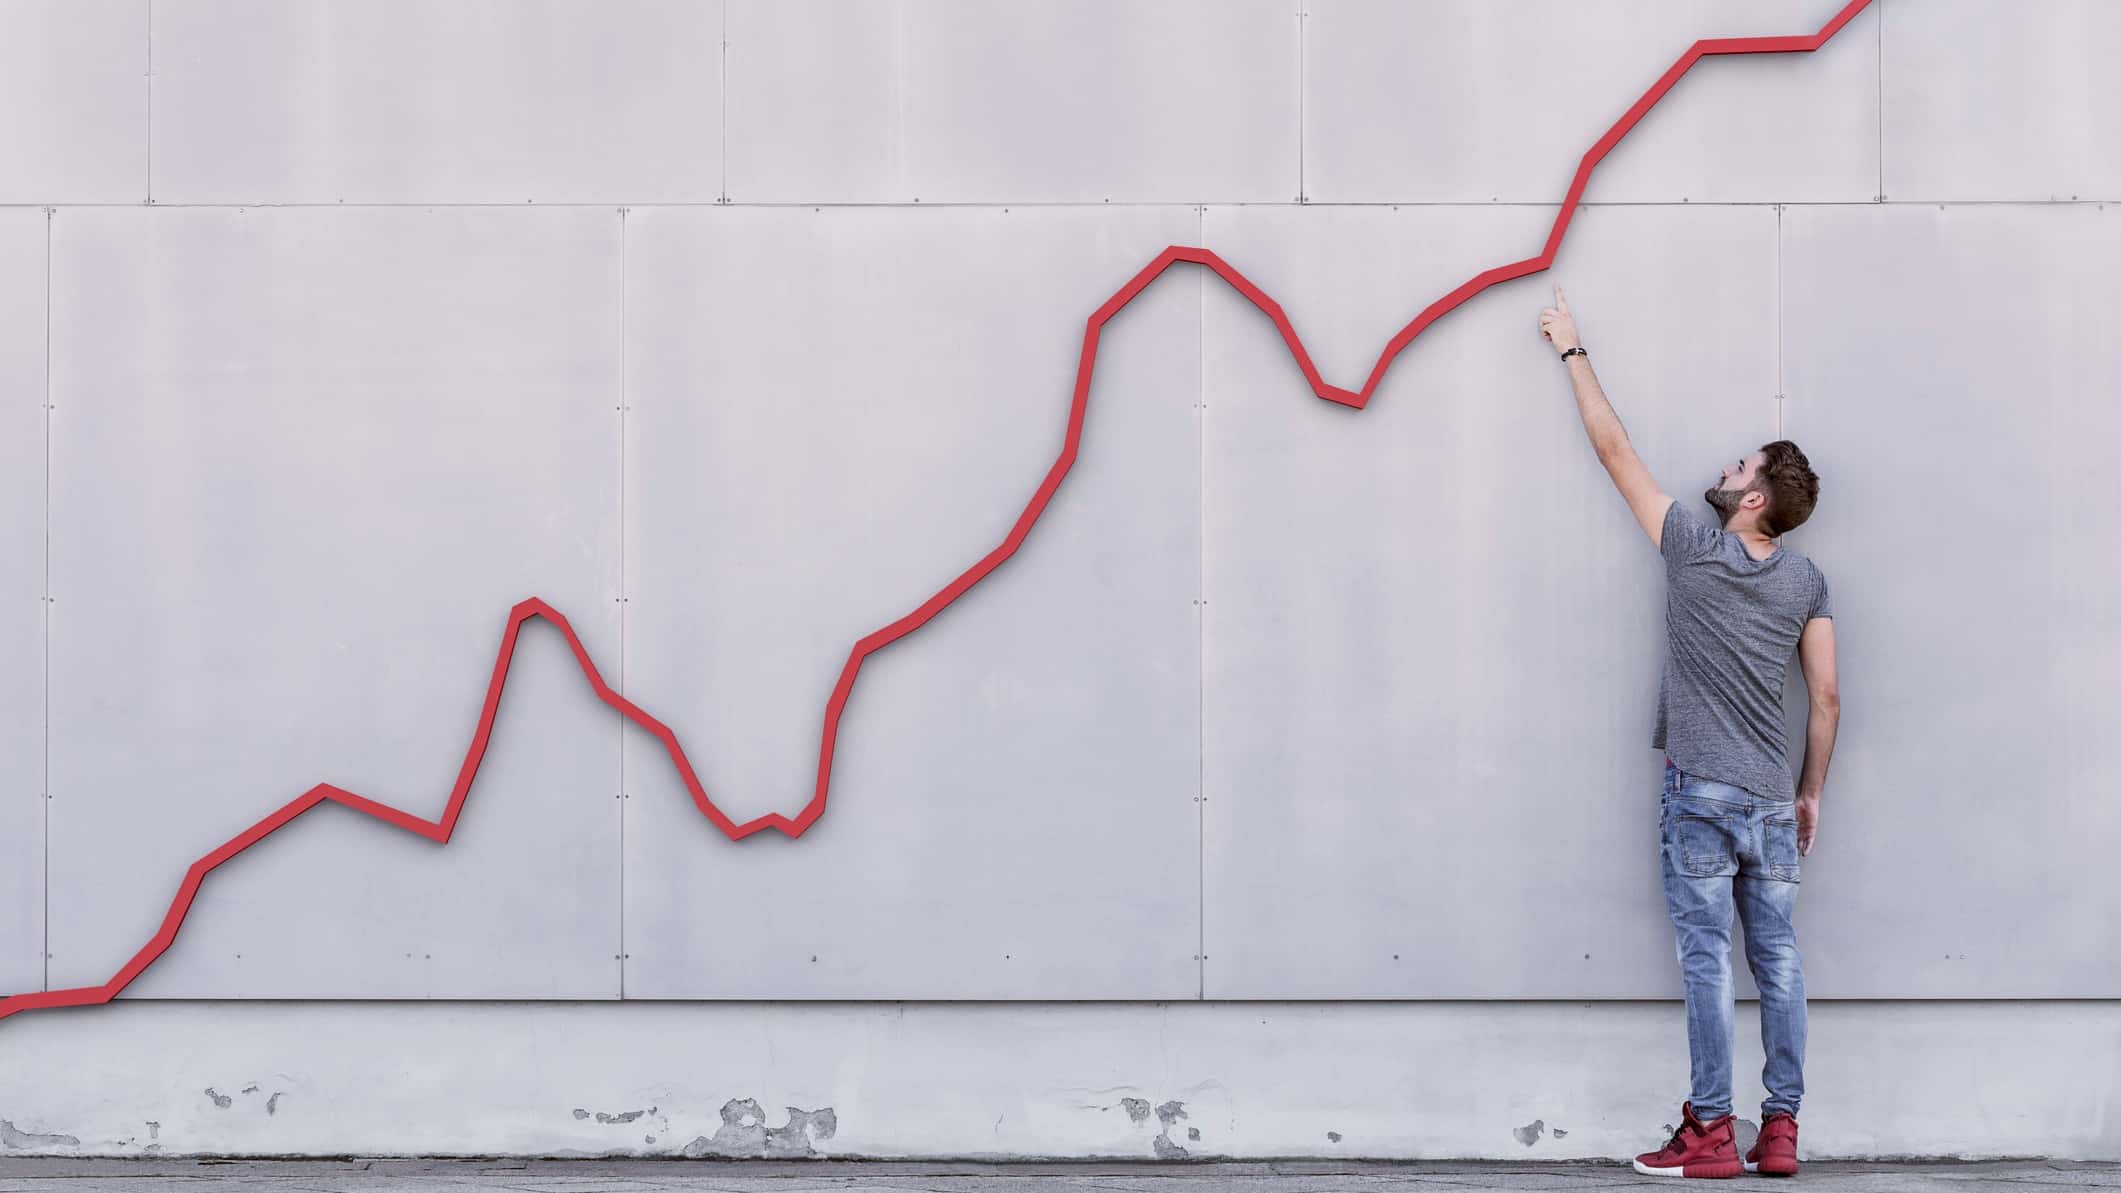 man pointing up at a rising red line which represents a growing share price